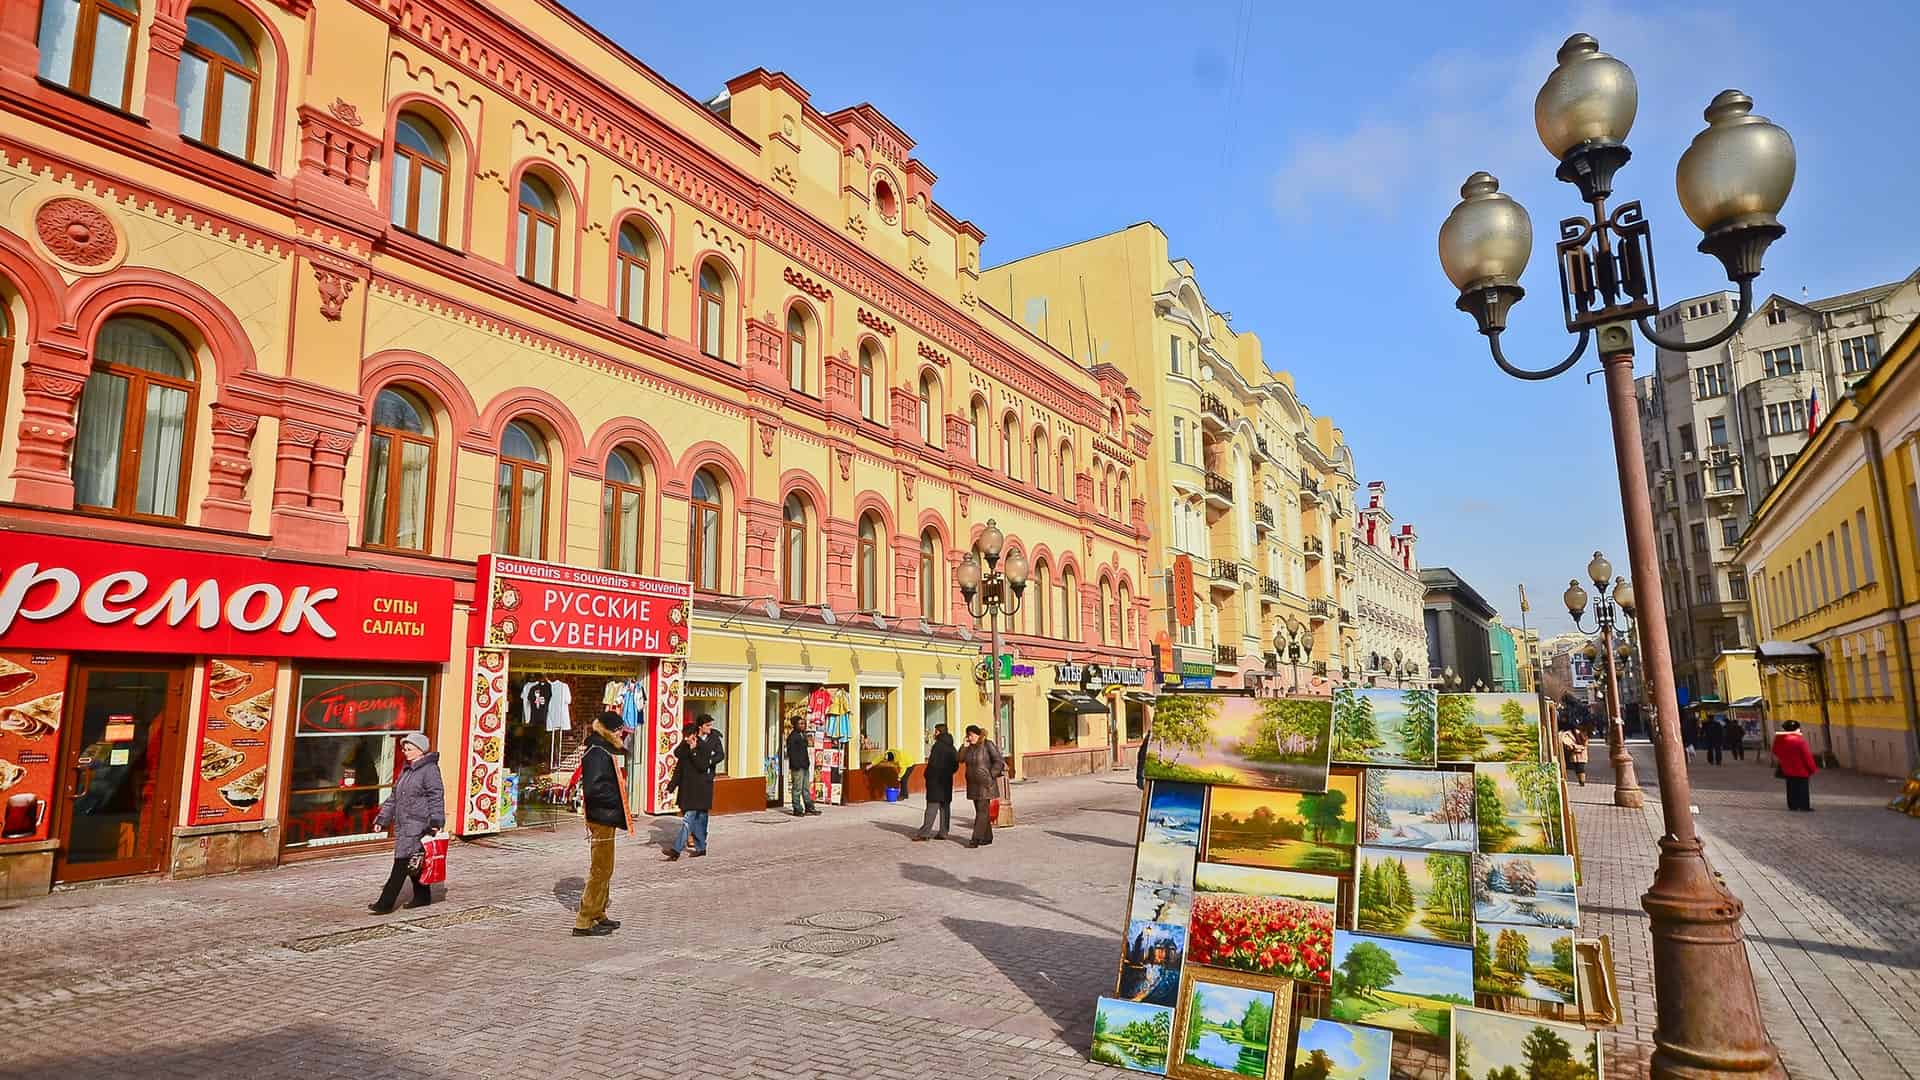 Places to see in Moscow: Arbat Street